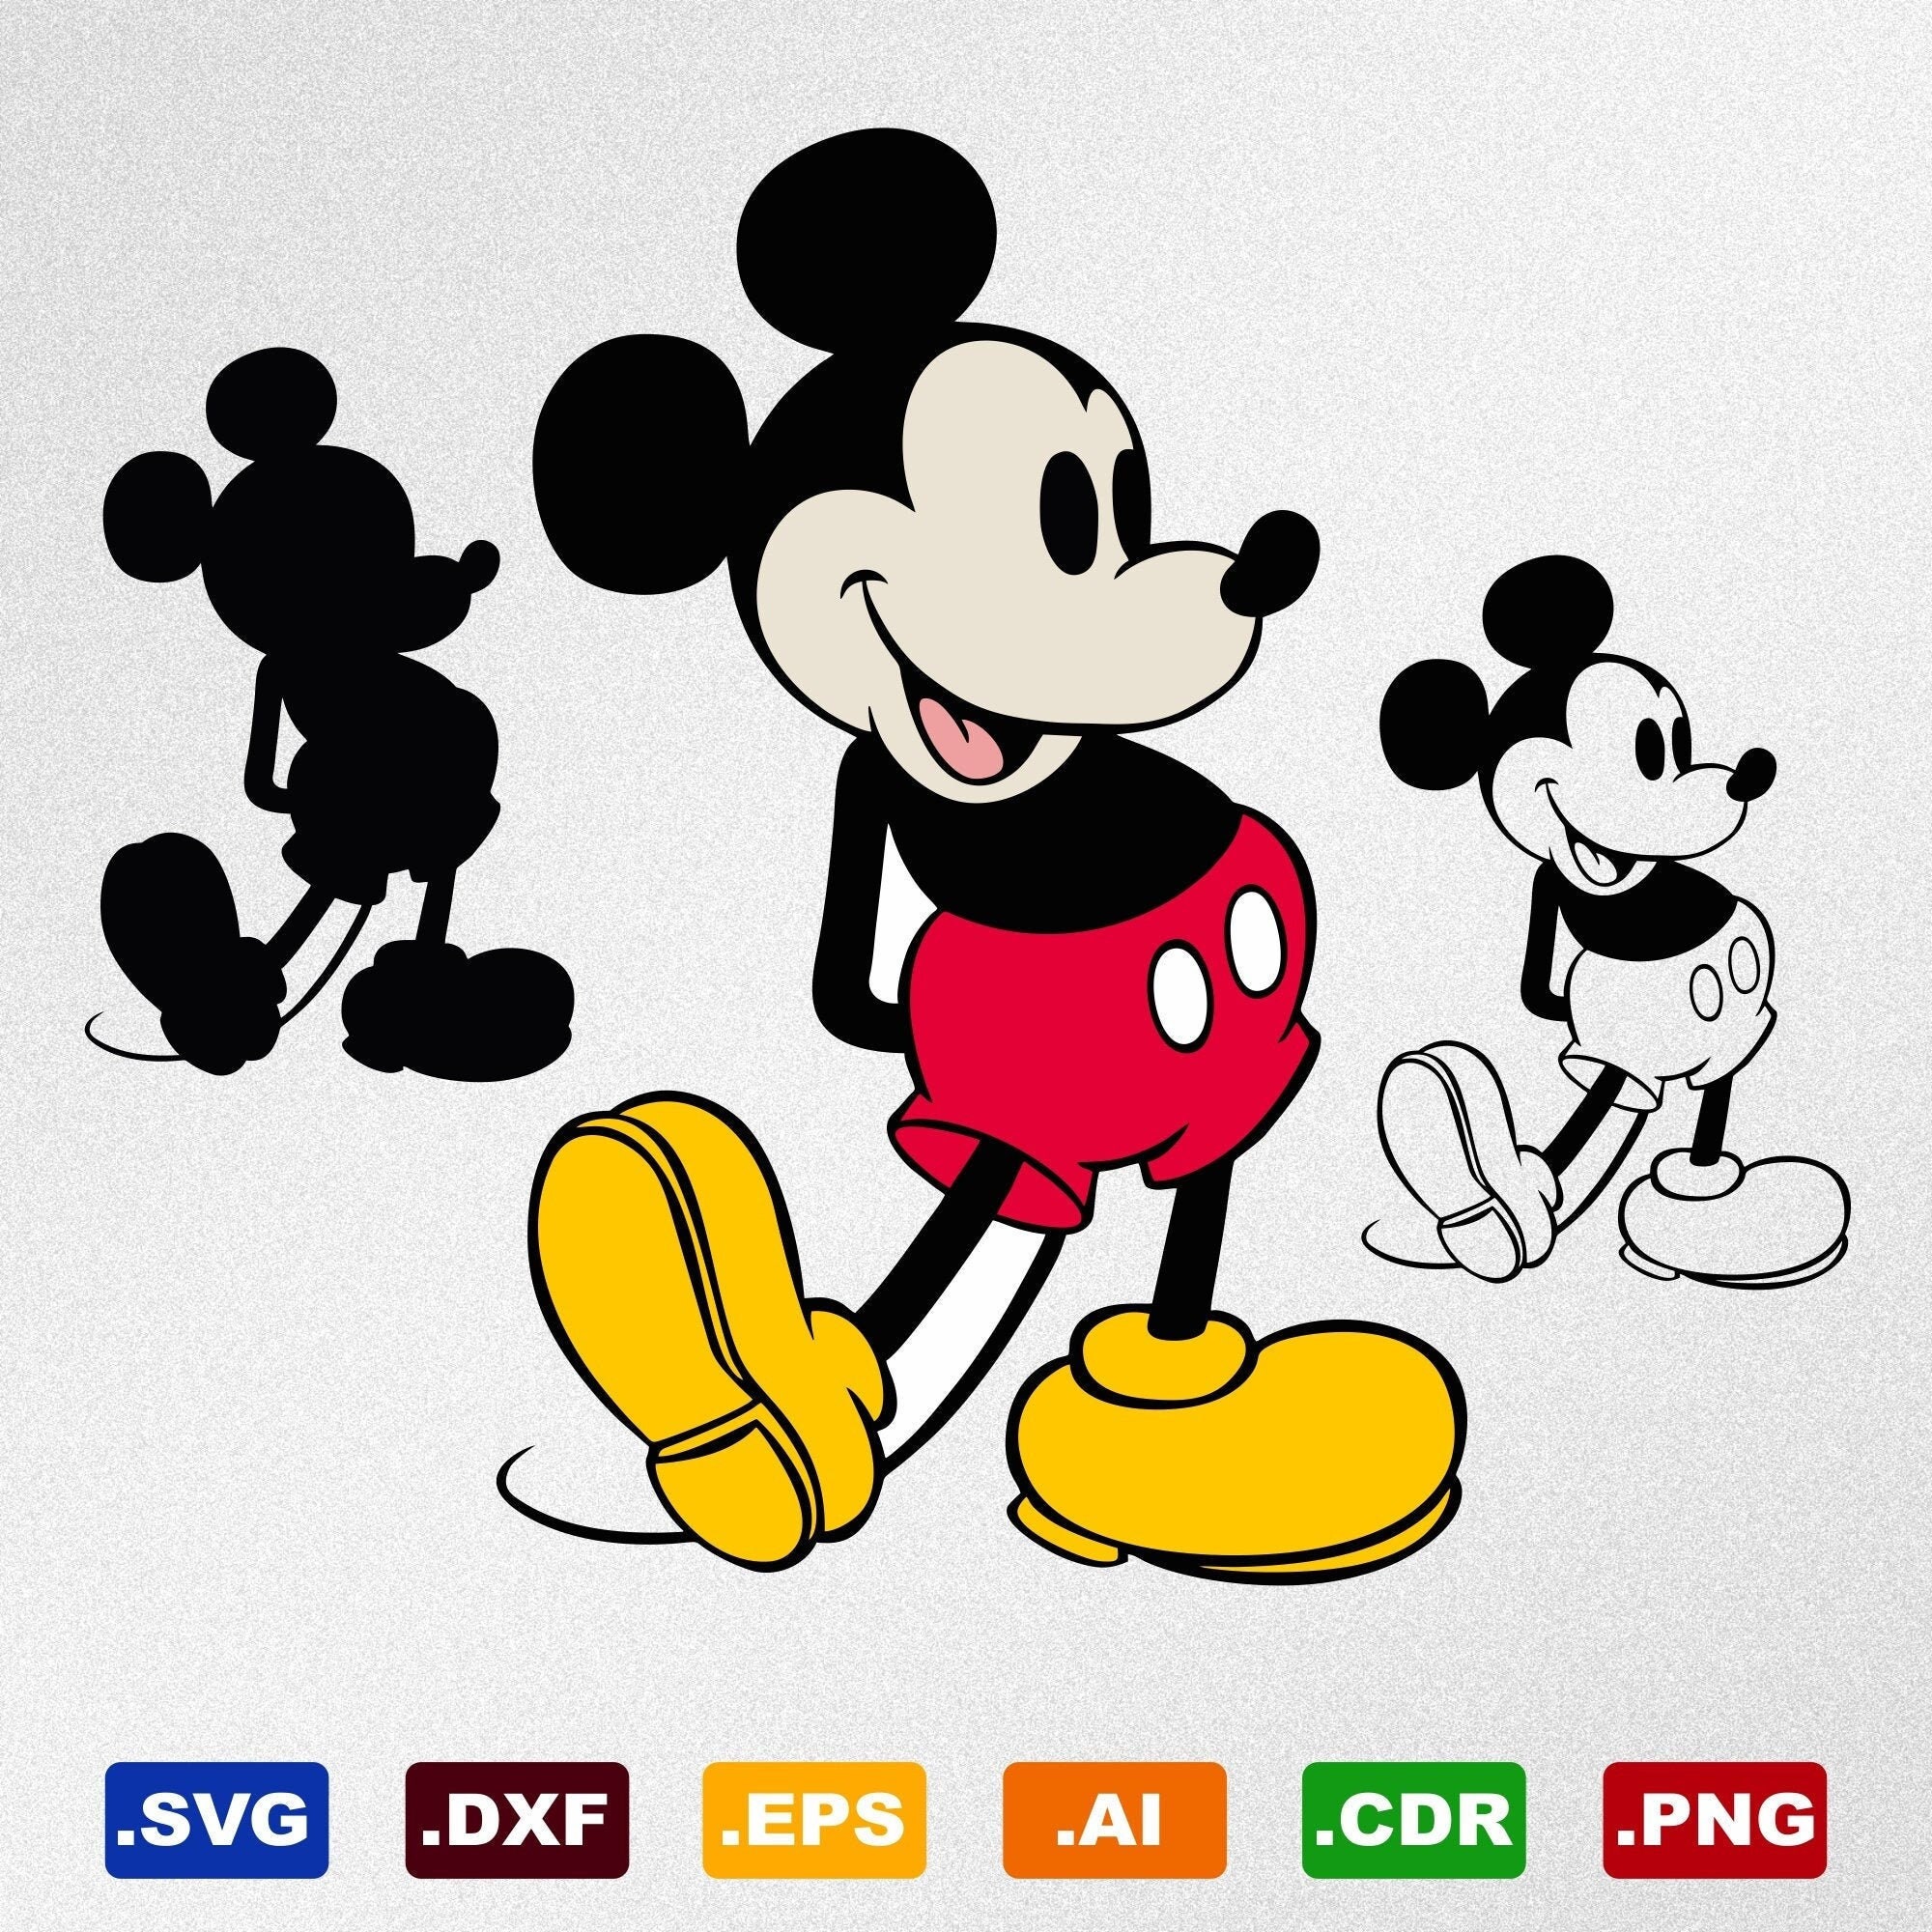 Mickey Mouse Vintage Retro Svg Dxf Eps Ai Cdr Vector Files | Etsy